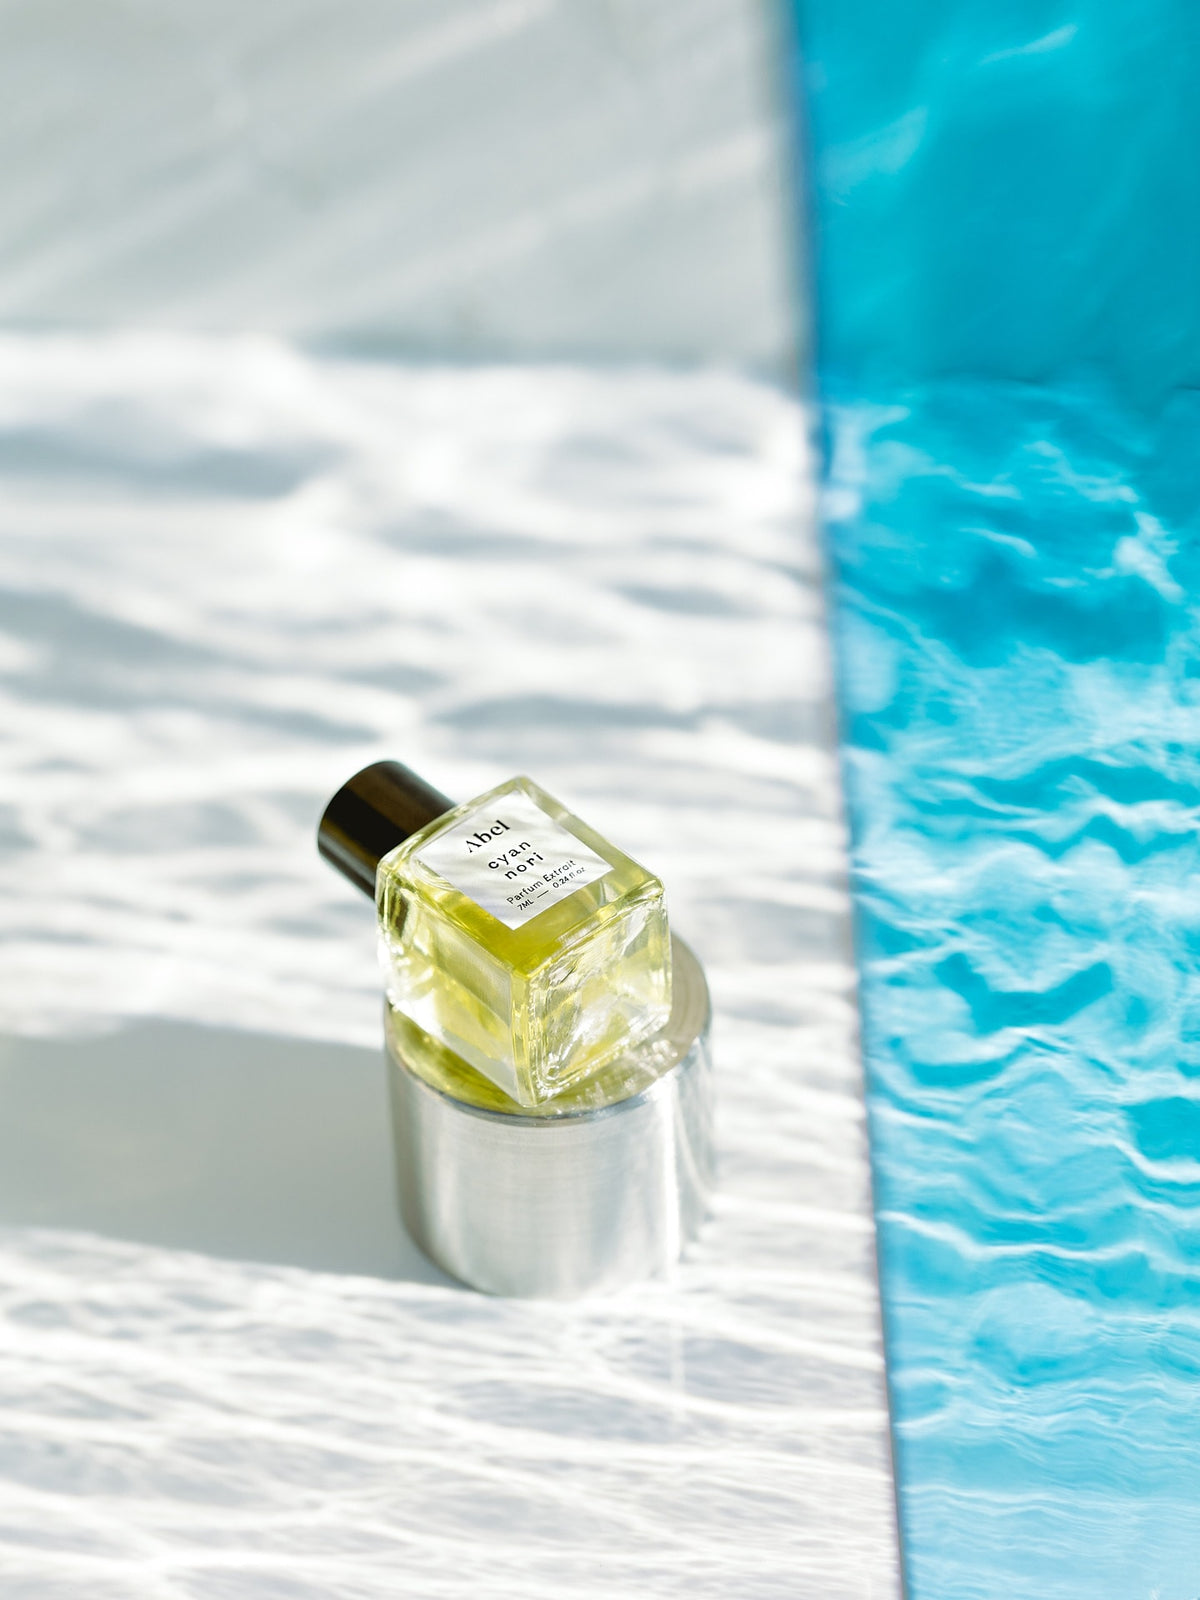 A bottle of Cyan Nori Parfum Extrait – for joy by Abel, creating a natural parfum, sitting on a table next to a pool.